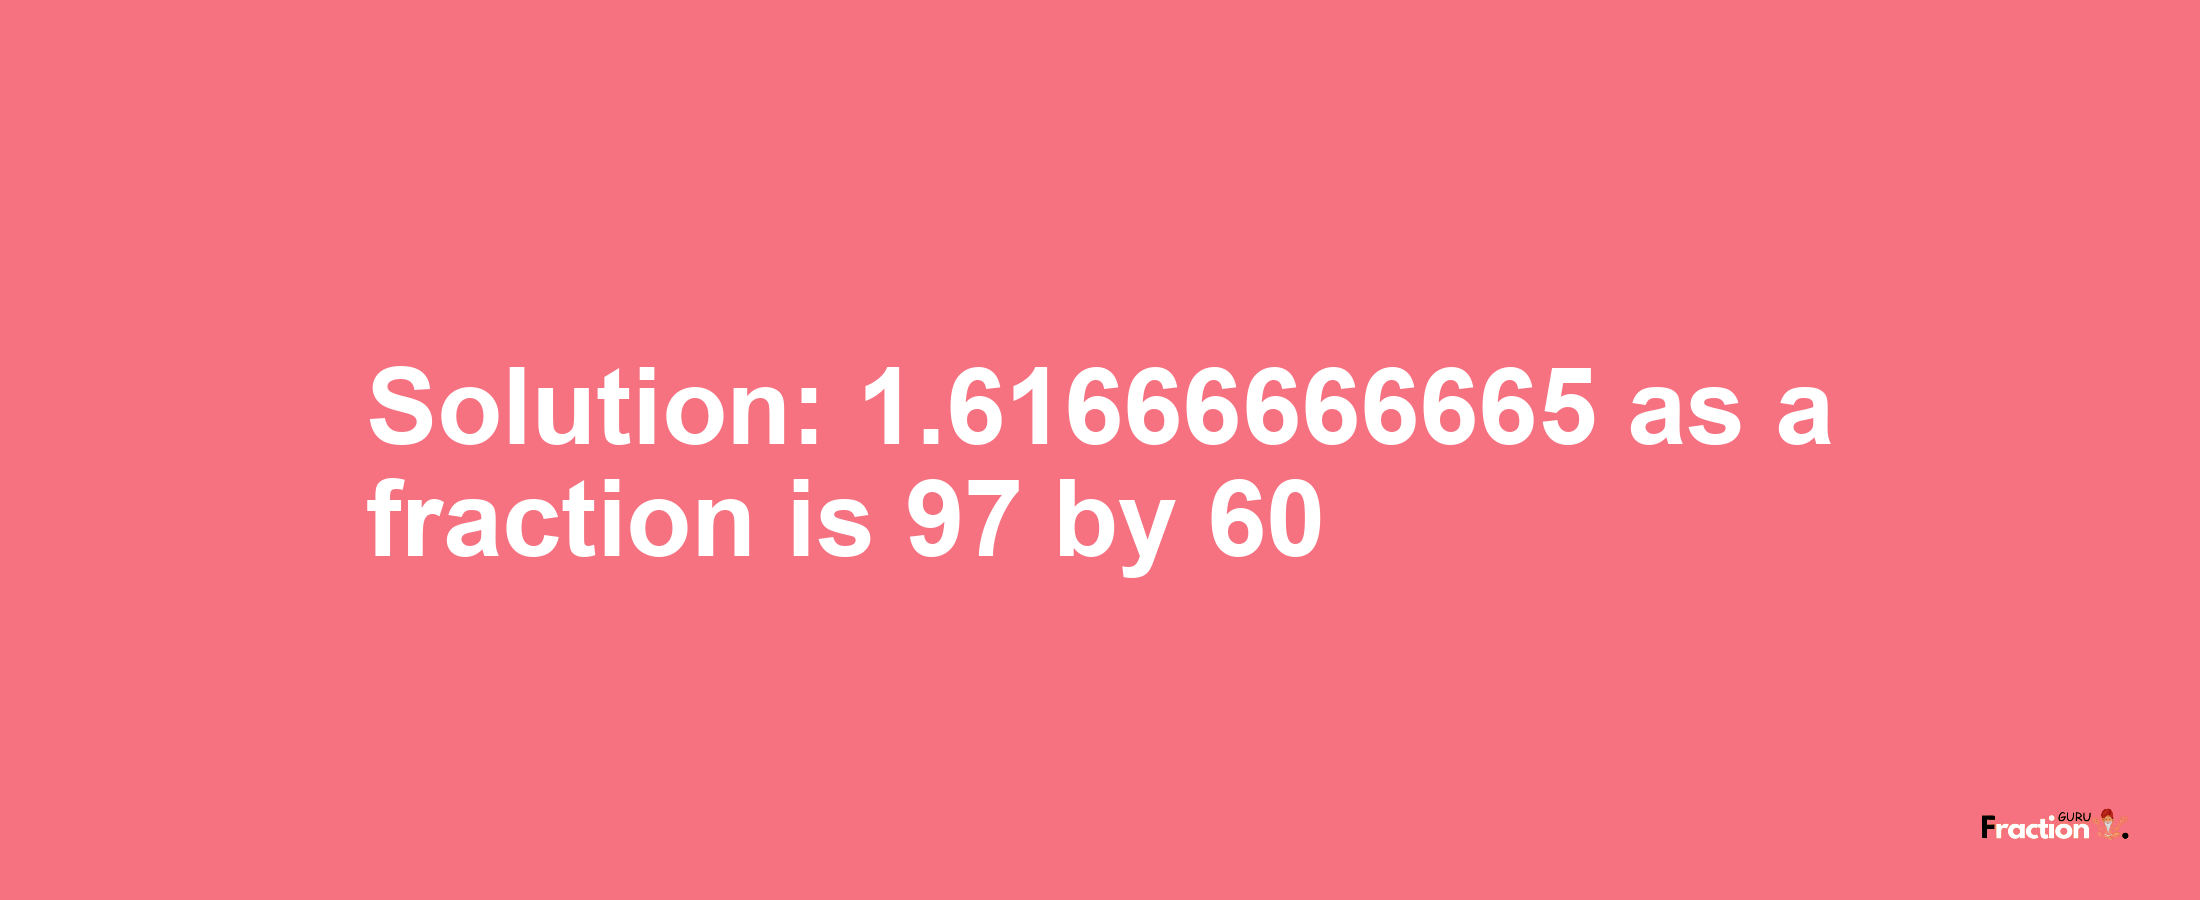 Solution:1.61666666665 as a fraction is 97/60